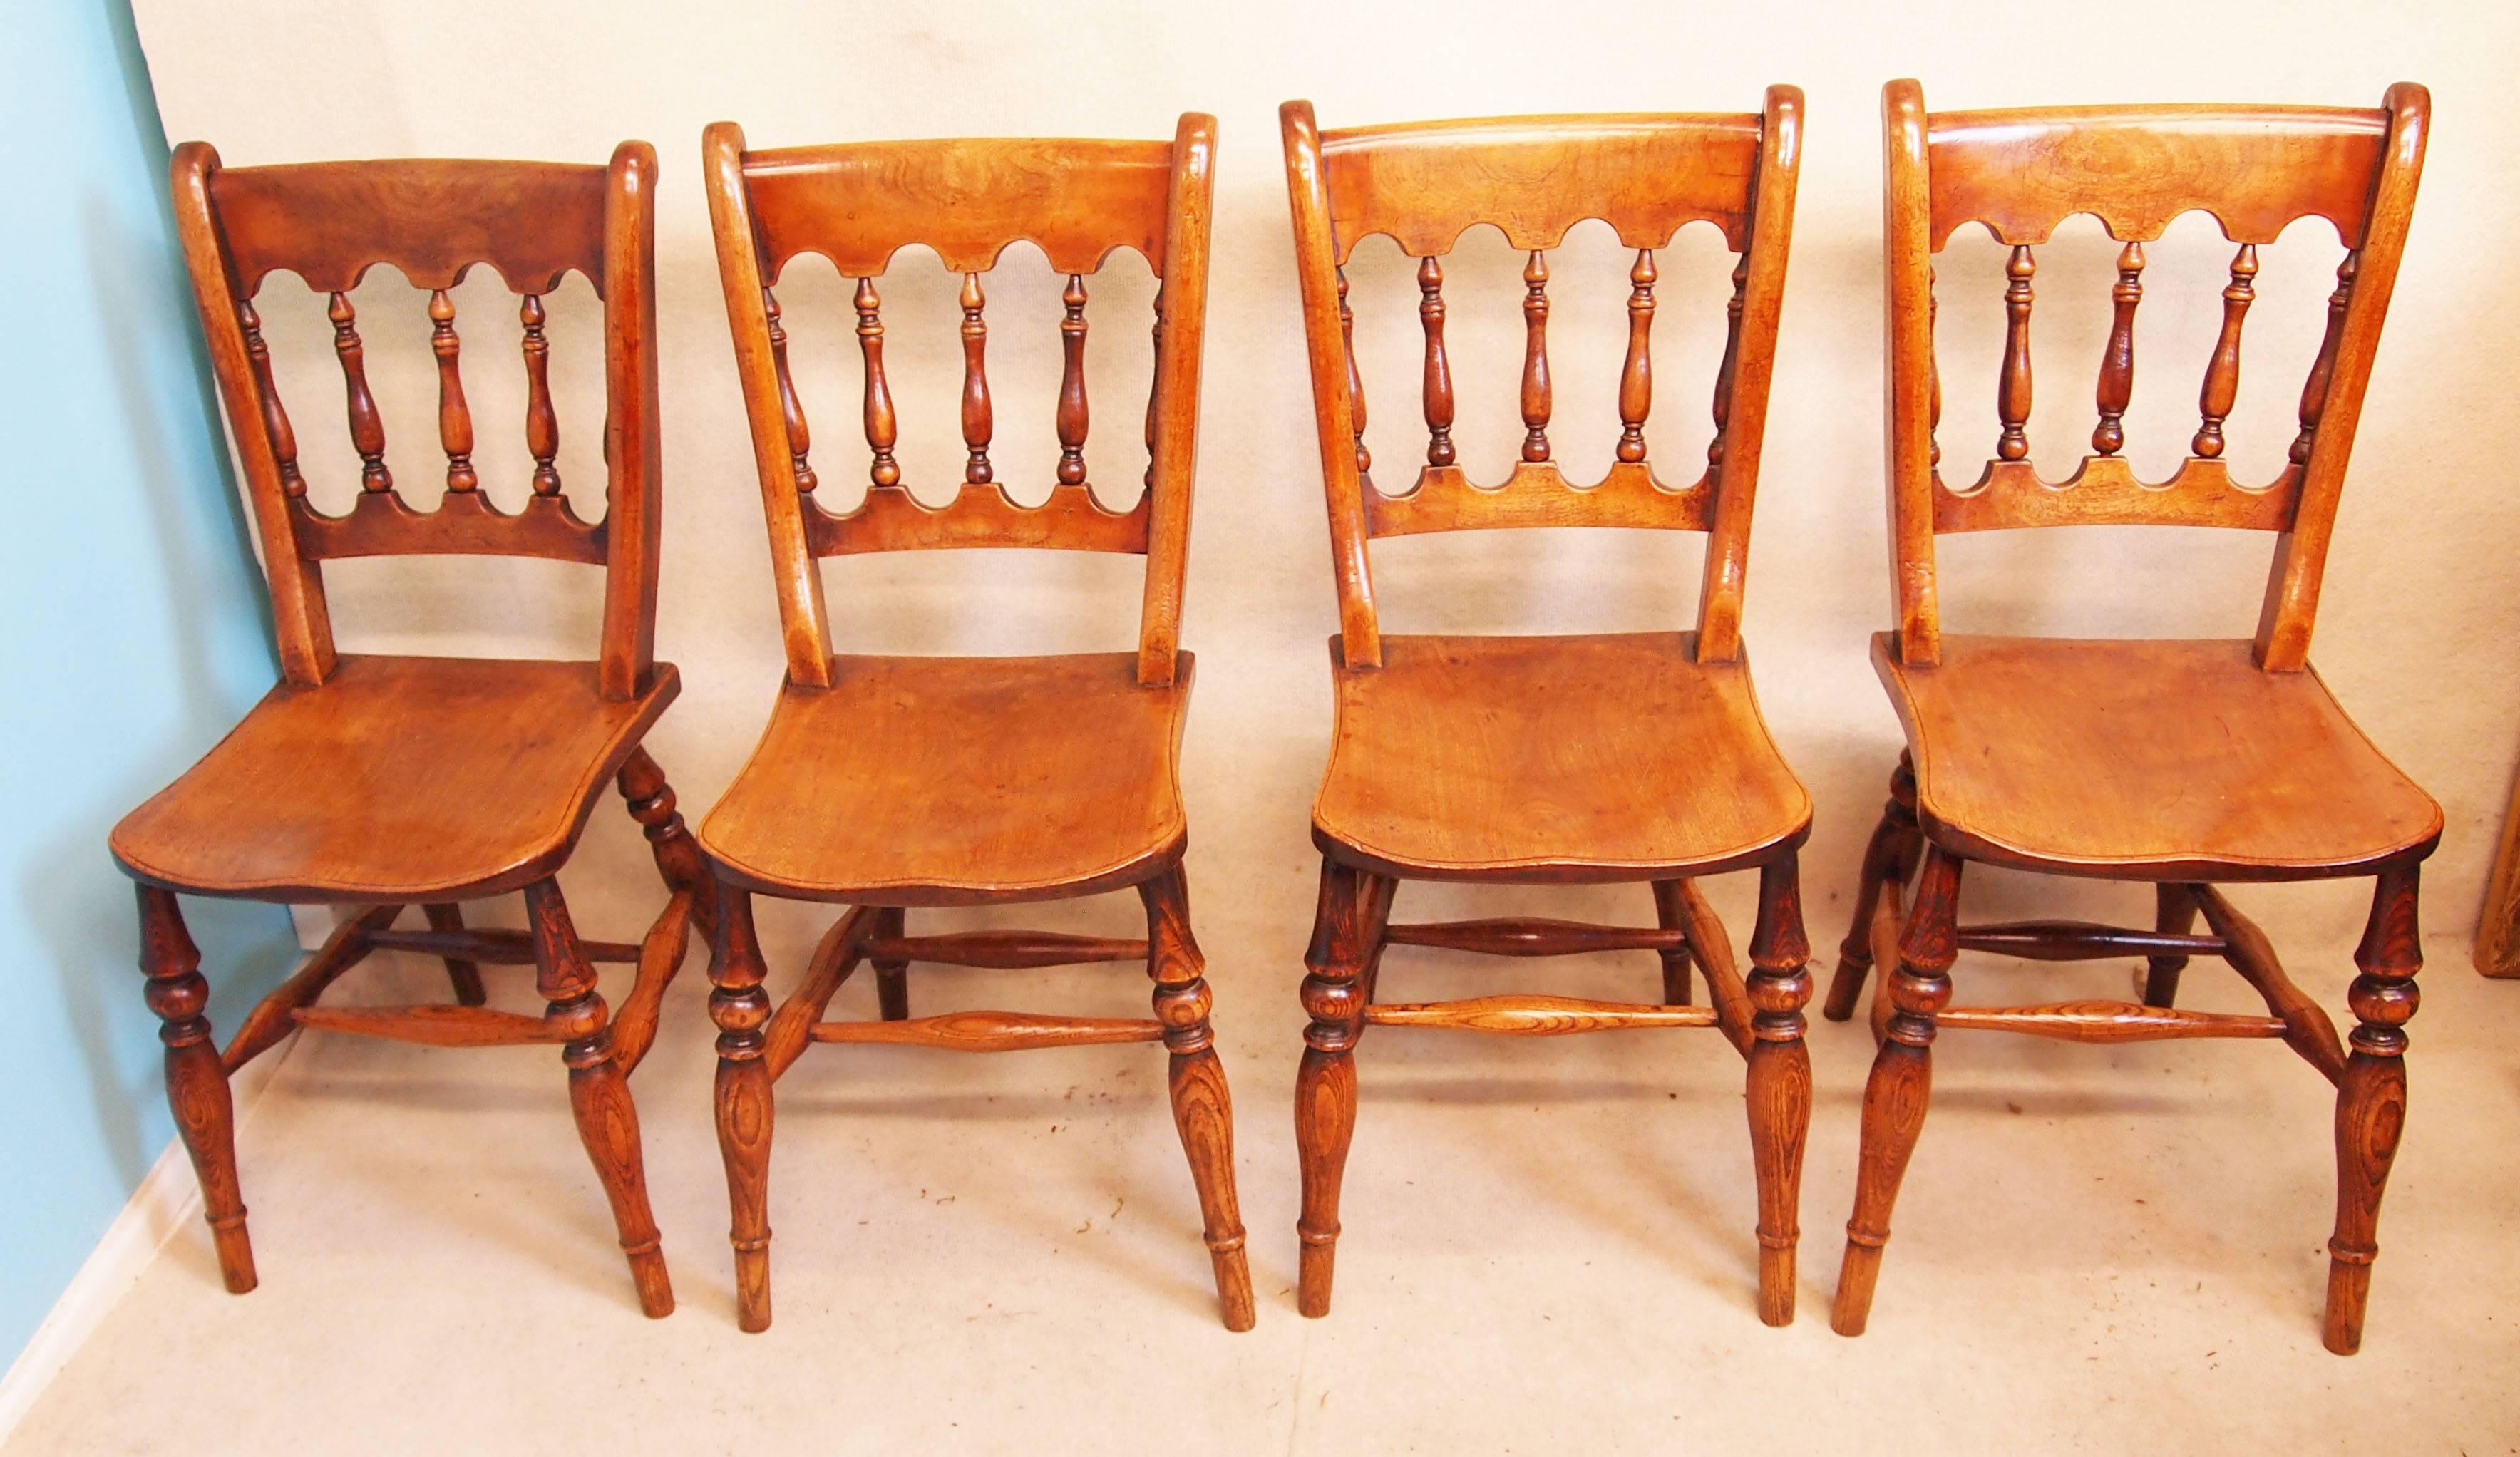 A very attractive matched set of eight mid-19th century 
Beech and elm kitchen Windsor chairs having elegant 
Turned upright spindle backs above shaped seats
Raised on turned tapering legs and turned stretchers

Measure: Height 33in
Width